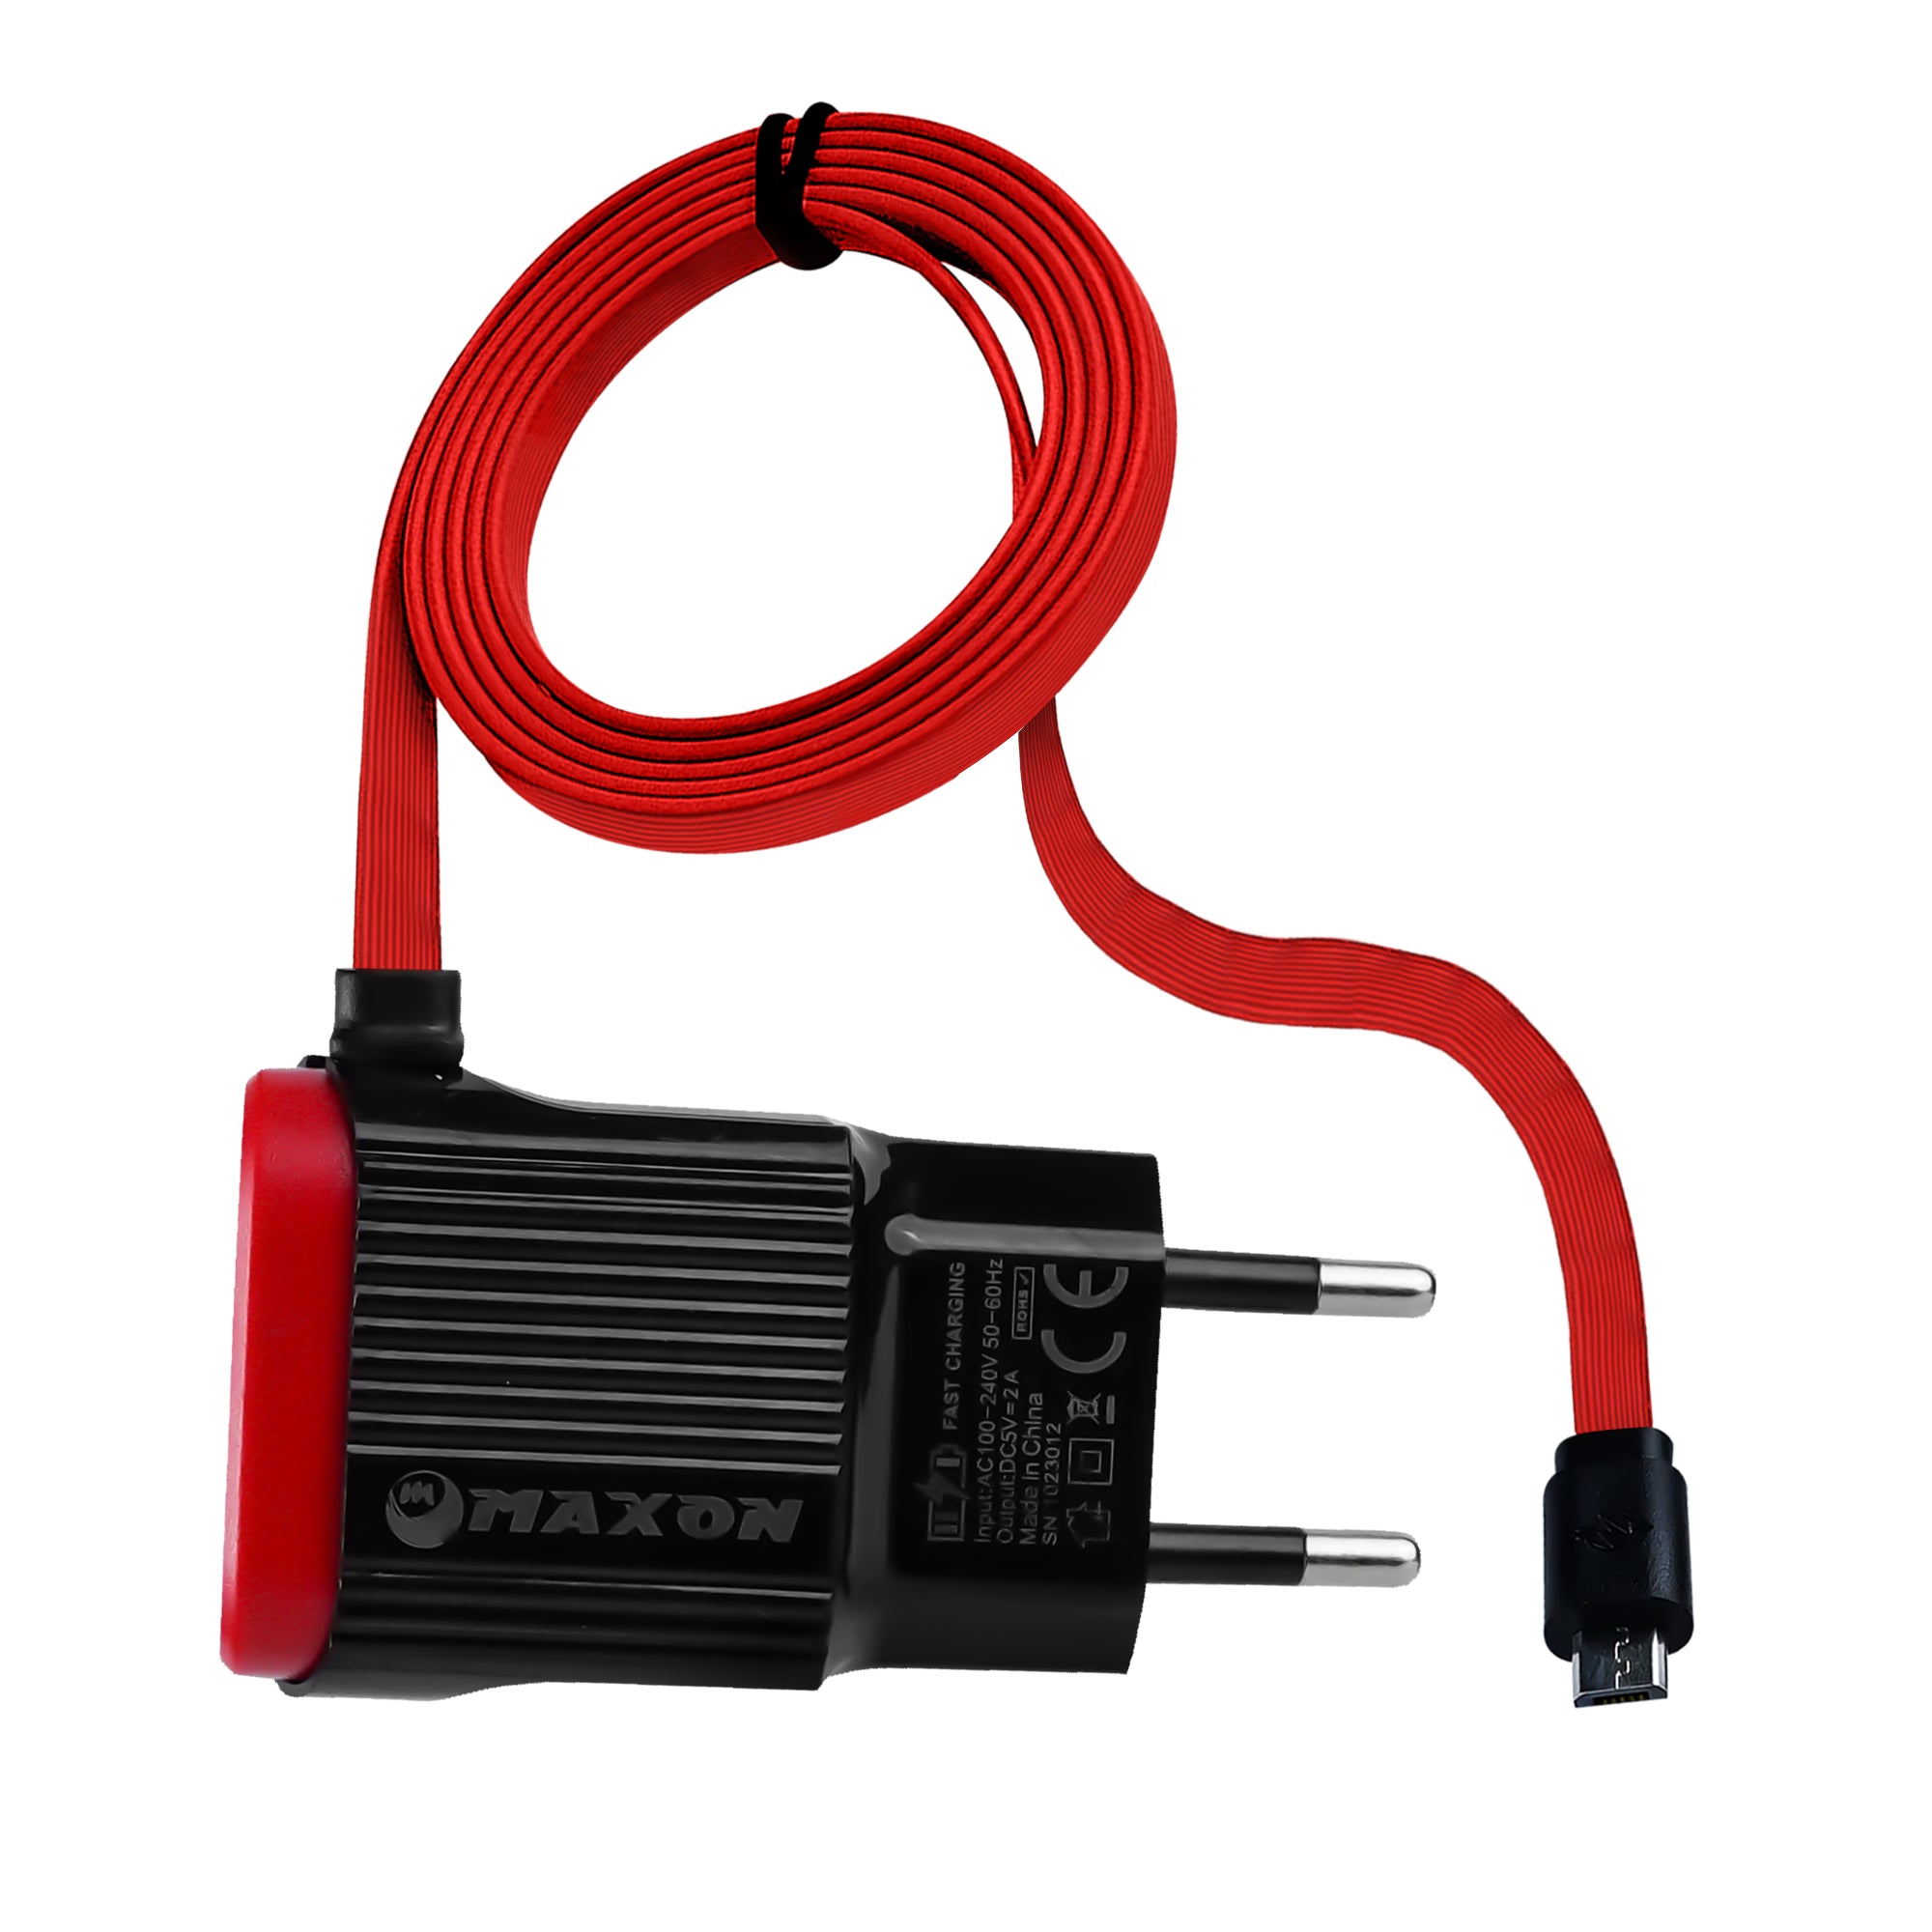 Maxon CP-08 Fast Charger